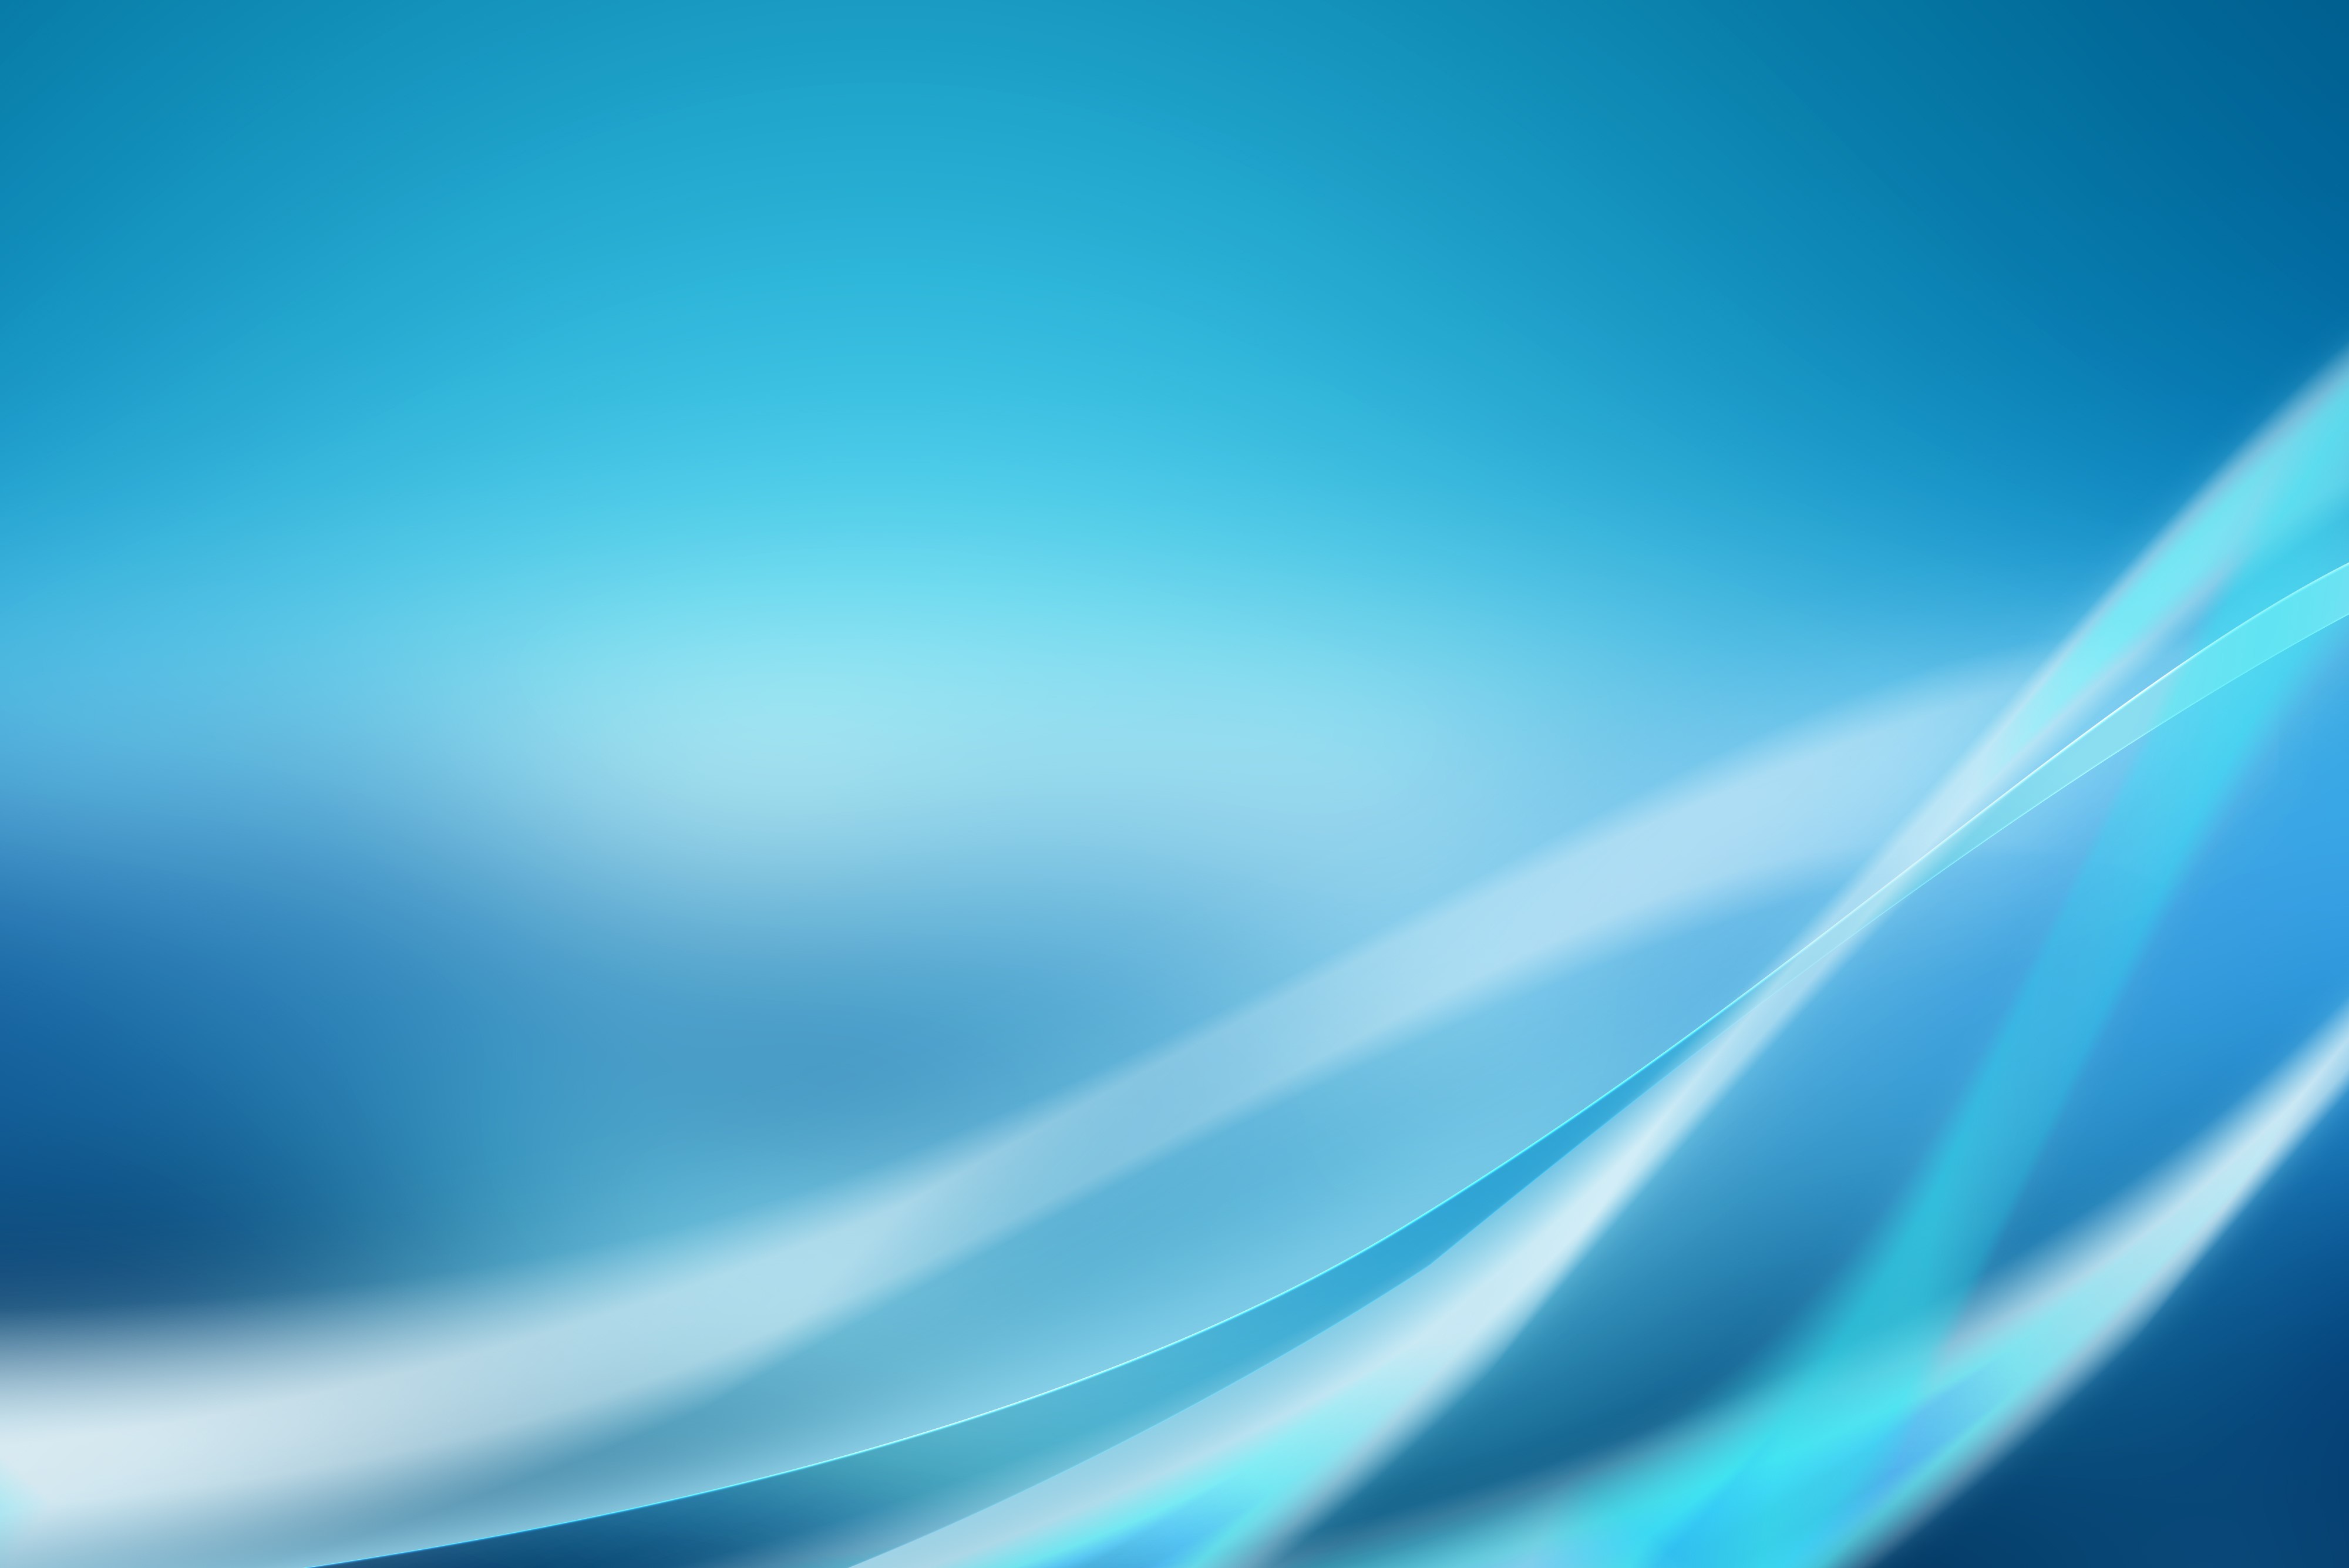 Abstract blue background with soft curves | Sciarabba Walker & Co., LLP